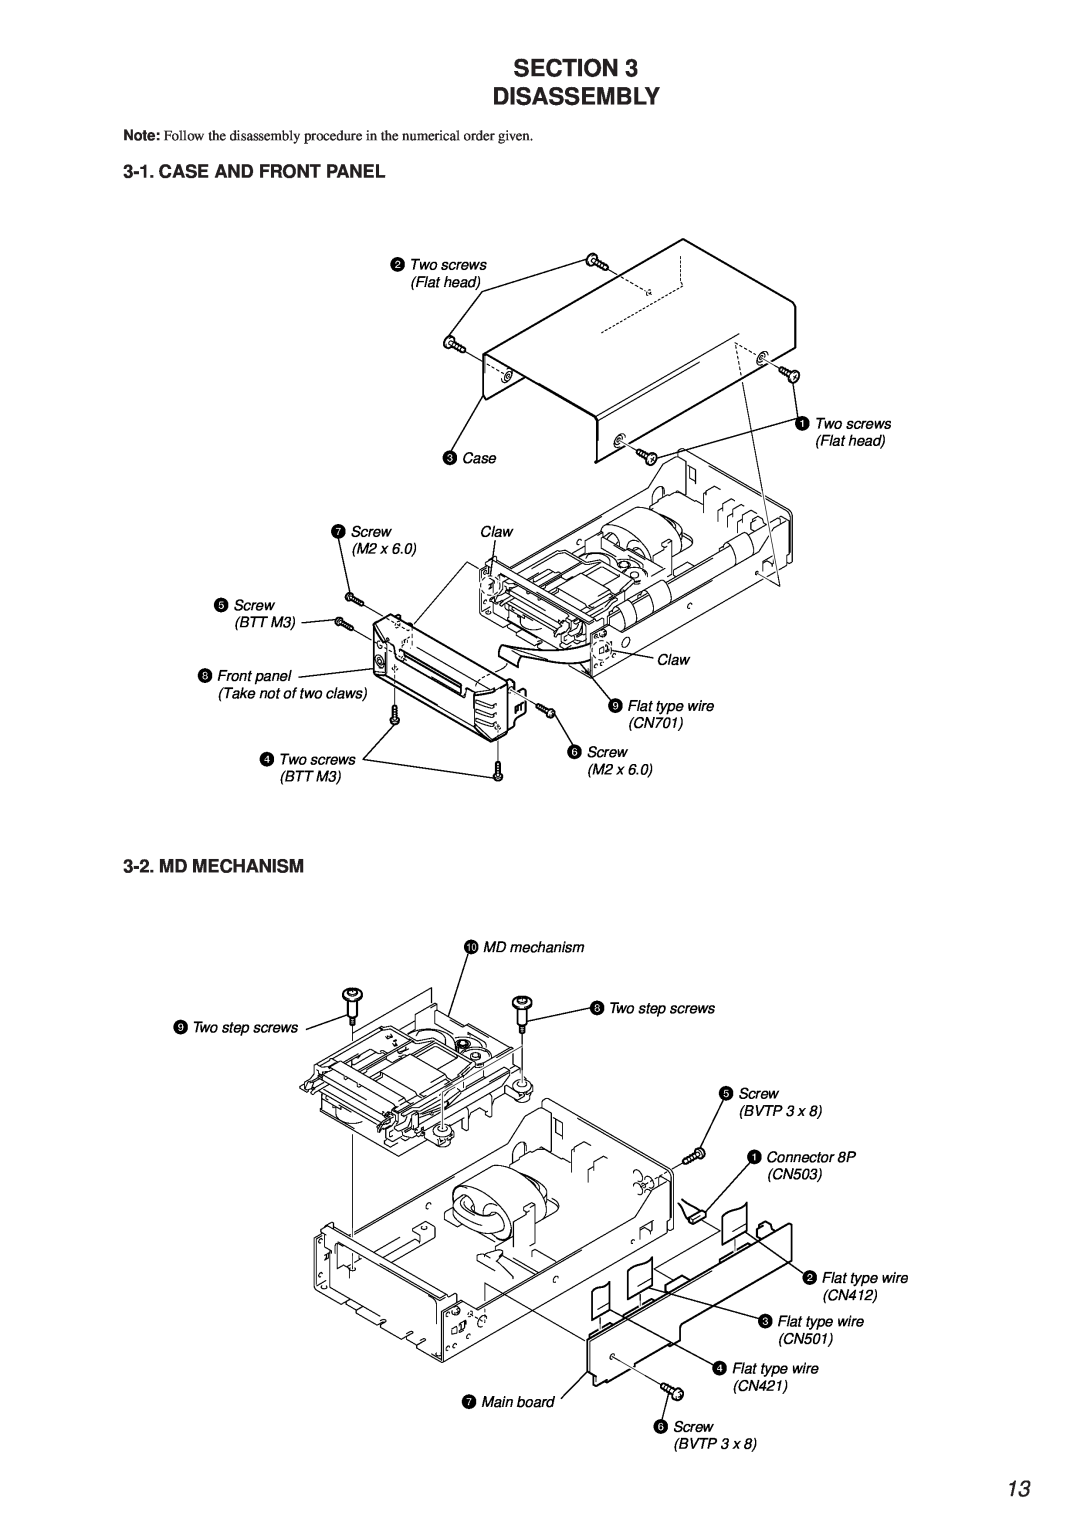 Sony MDS-PC2 service manual Section Disassembly, Case And Front Panel, Md Mechanism 